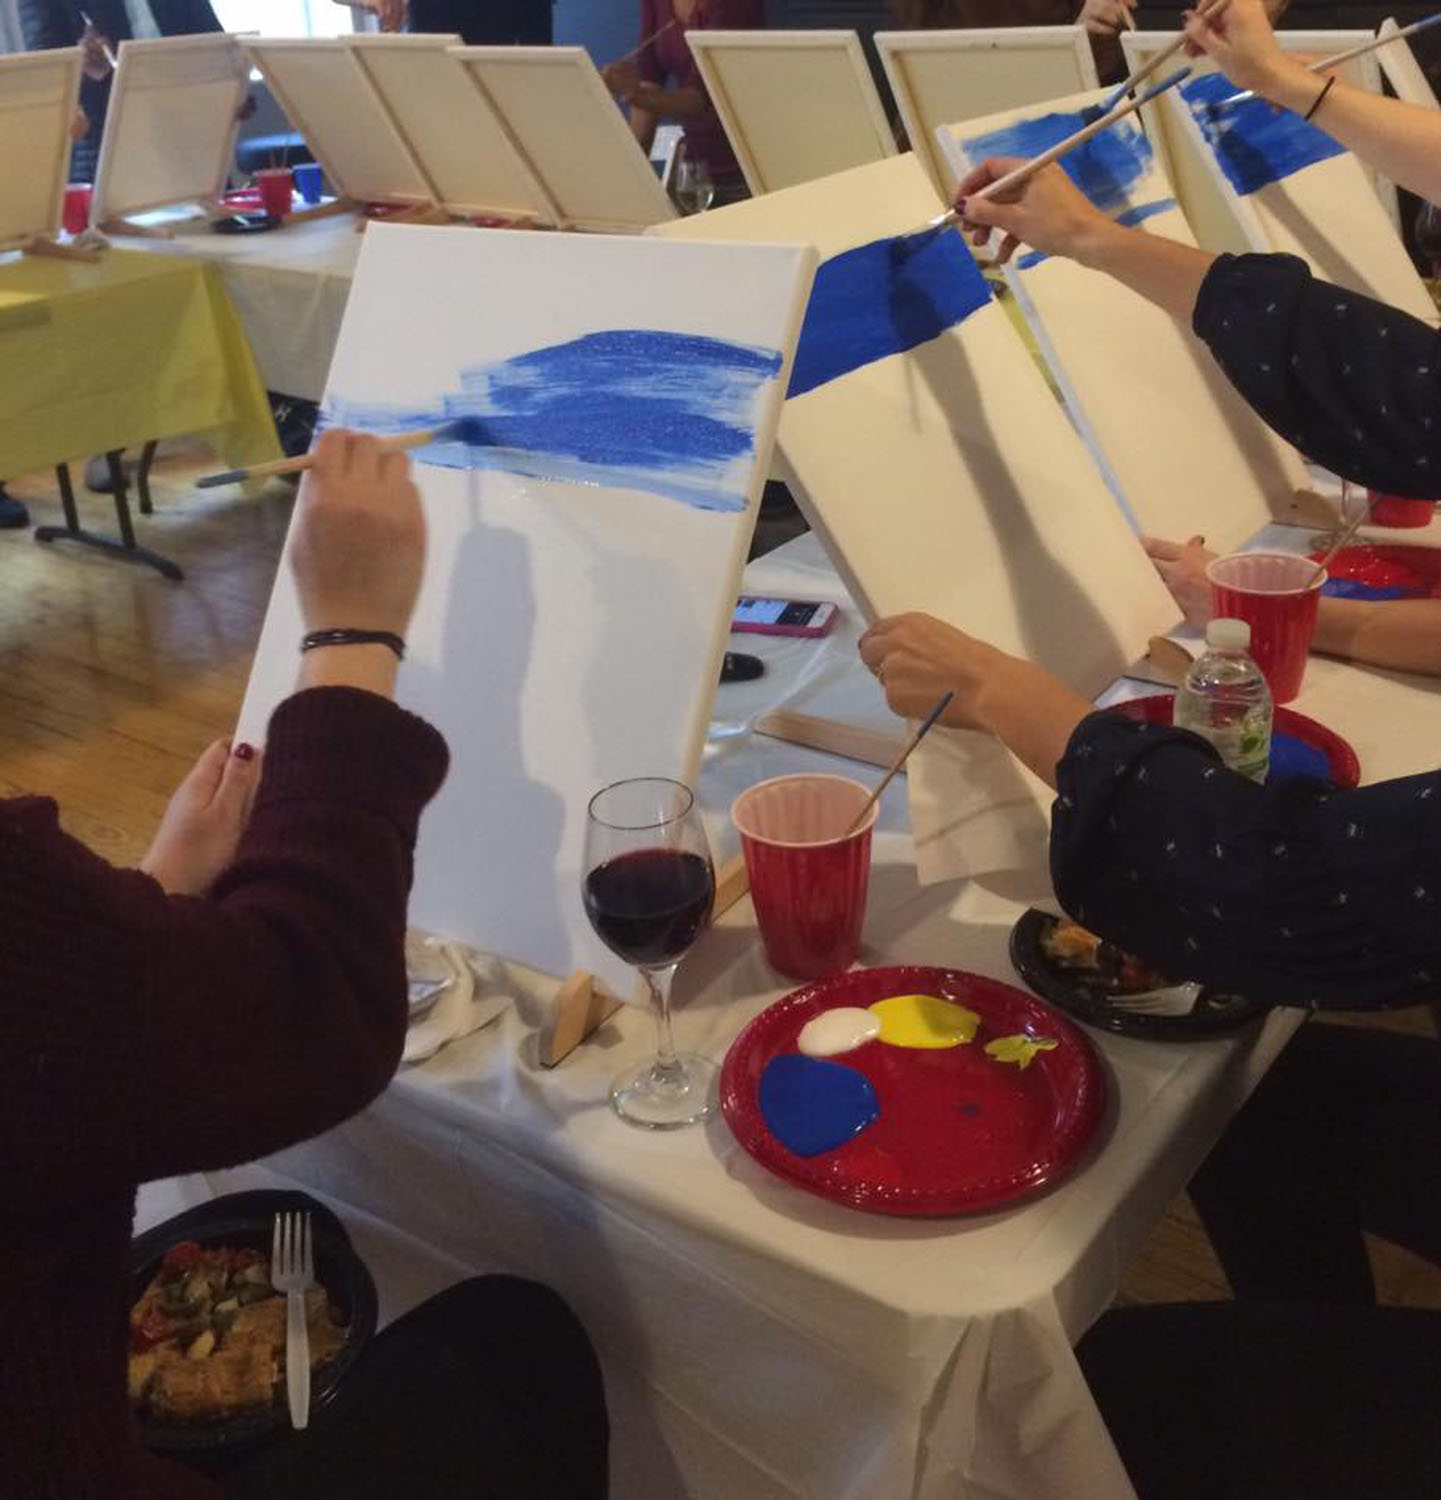 Paint and Sip: A fun paint and sip event in a bar or restaurant.